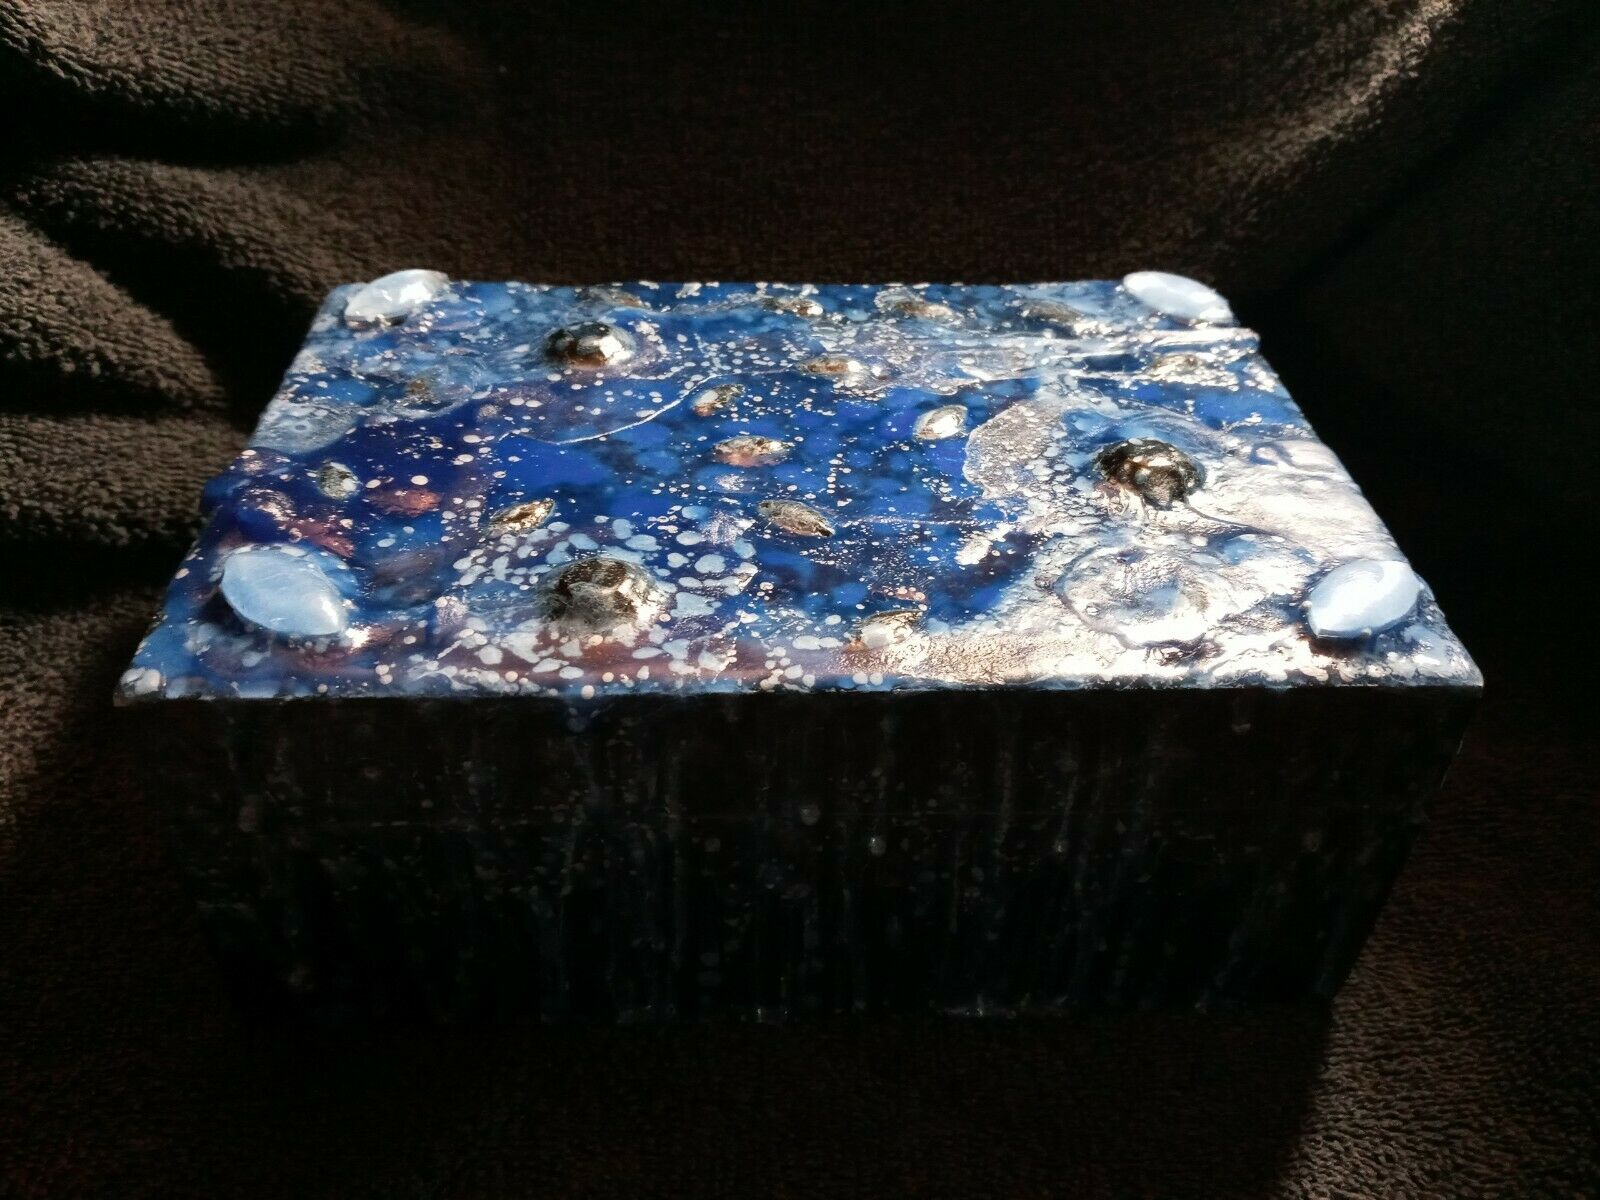 Blue Wax Gem Encrusted Dybbuk Box. Buyer Beware, Contents Unknown